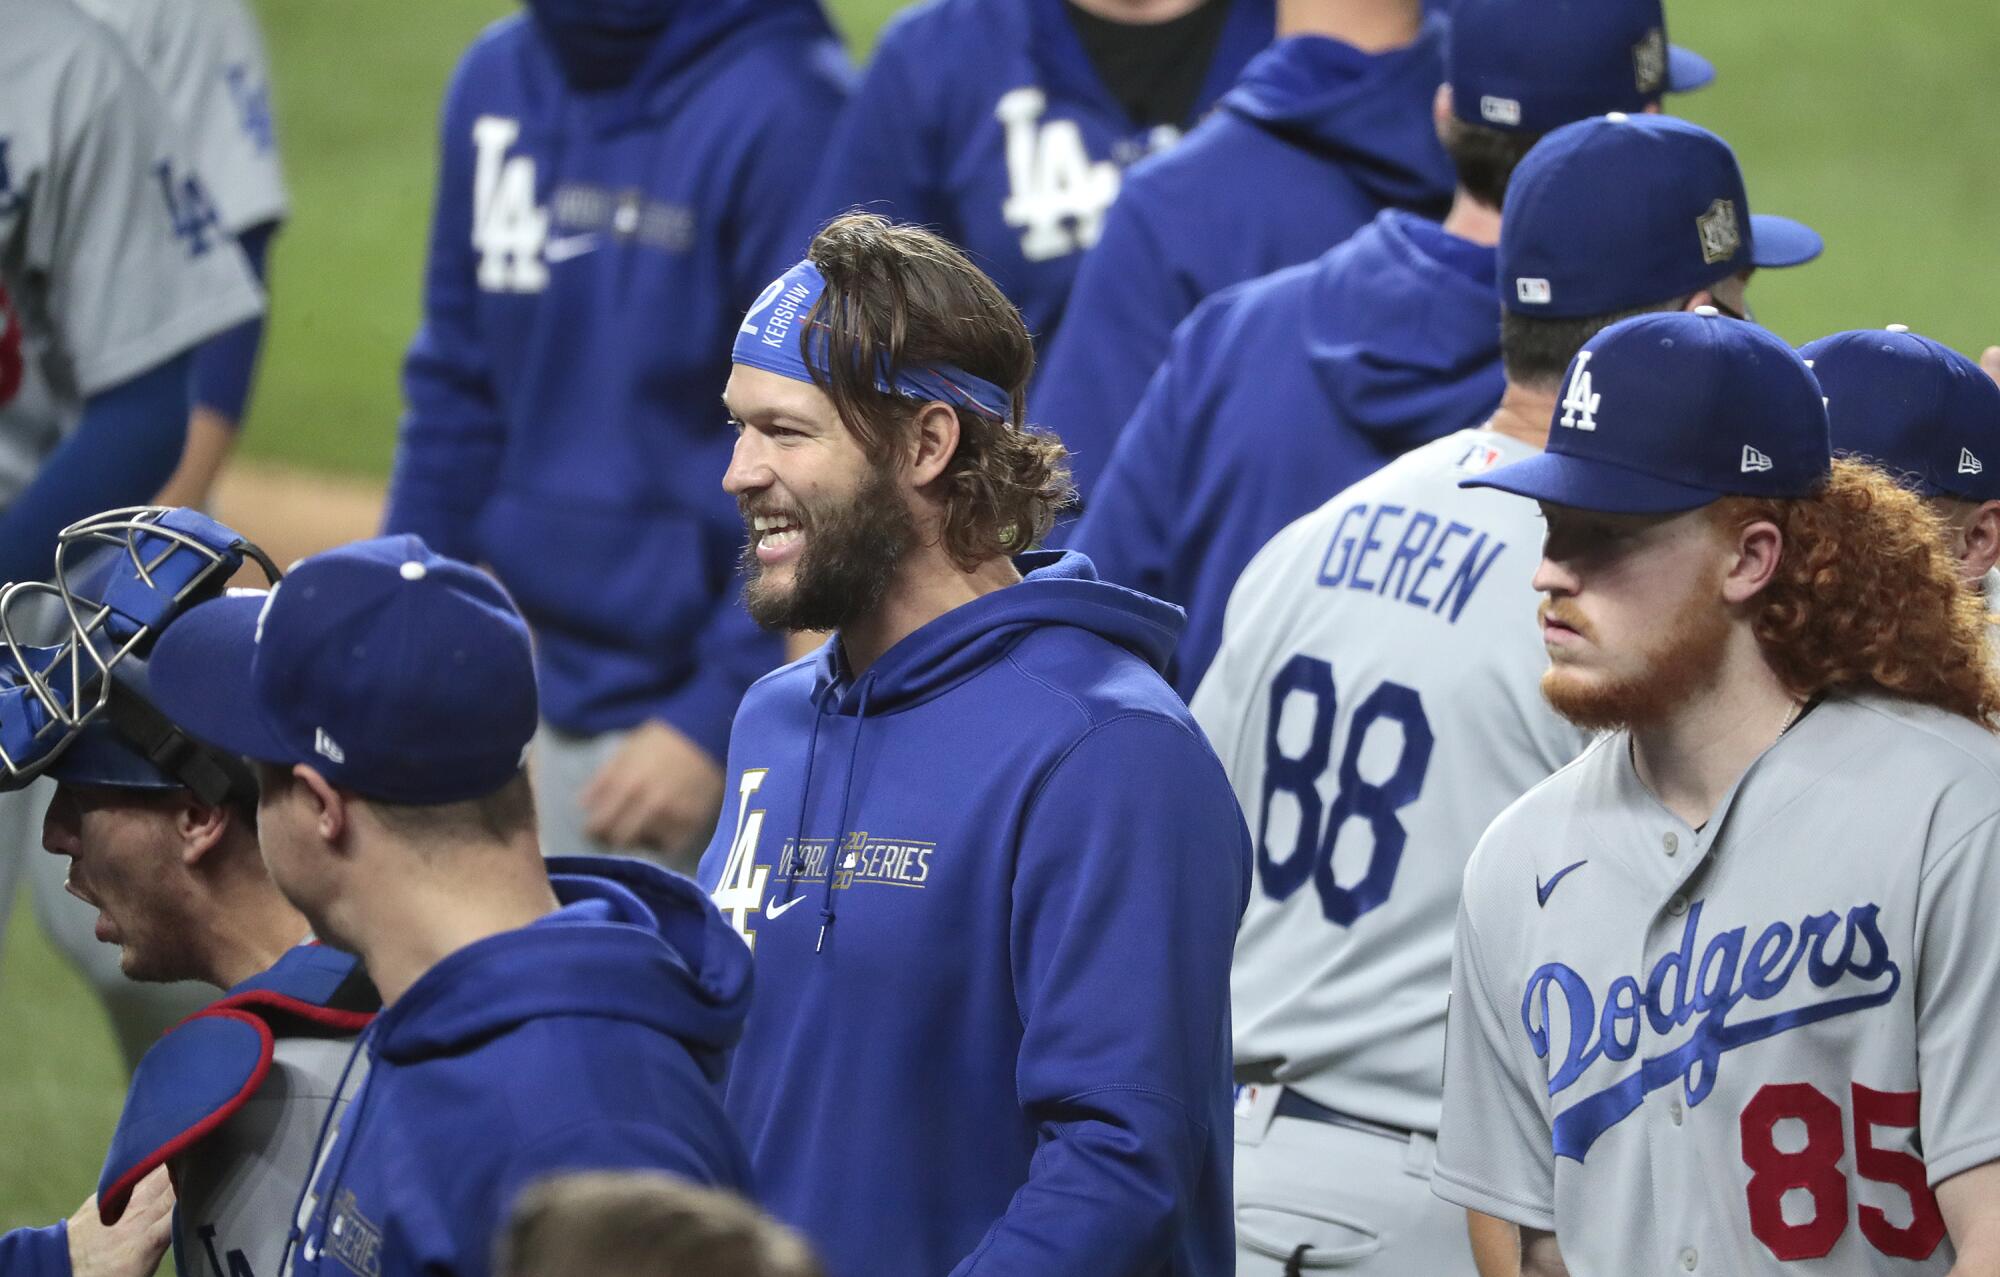 Game 5 starter Clayton Kershaw, center, smiles after the Dodgers move to within one win of the World Series championship.